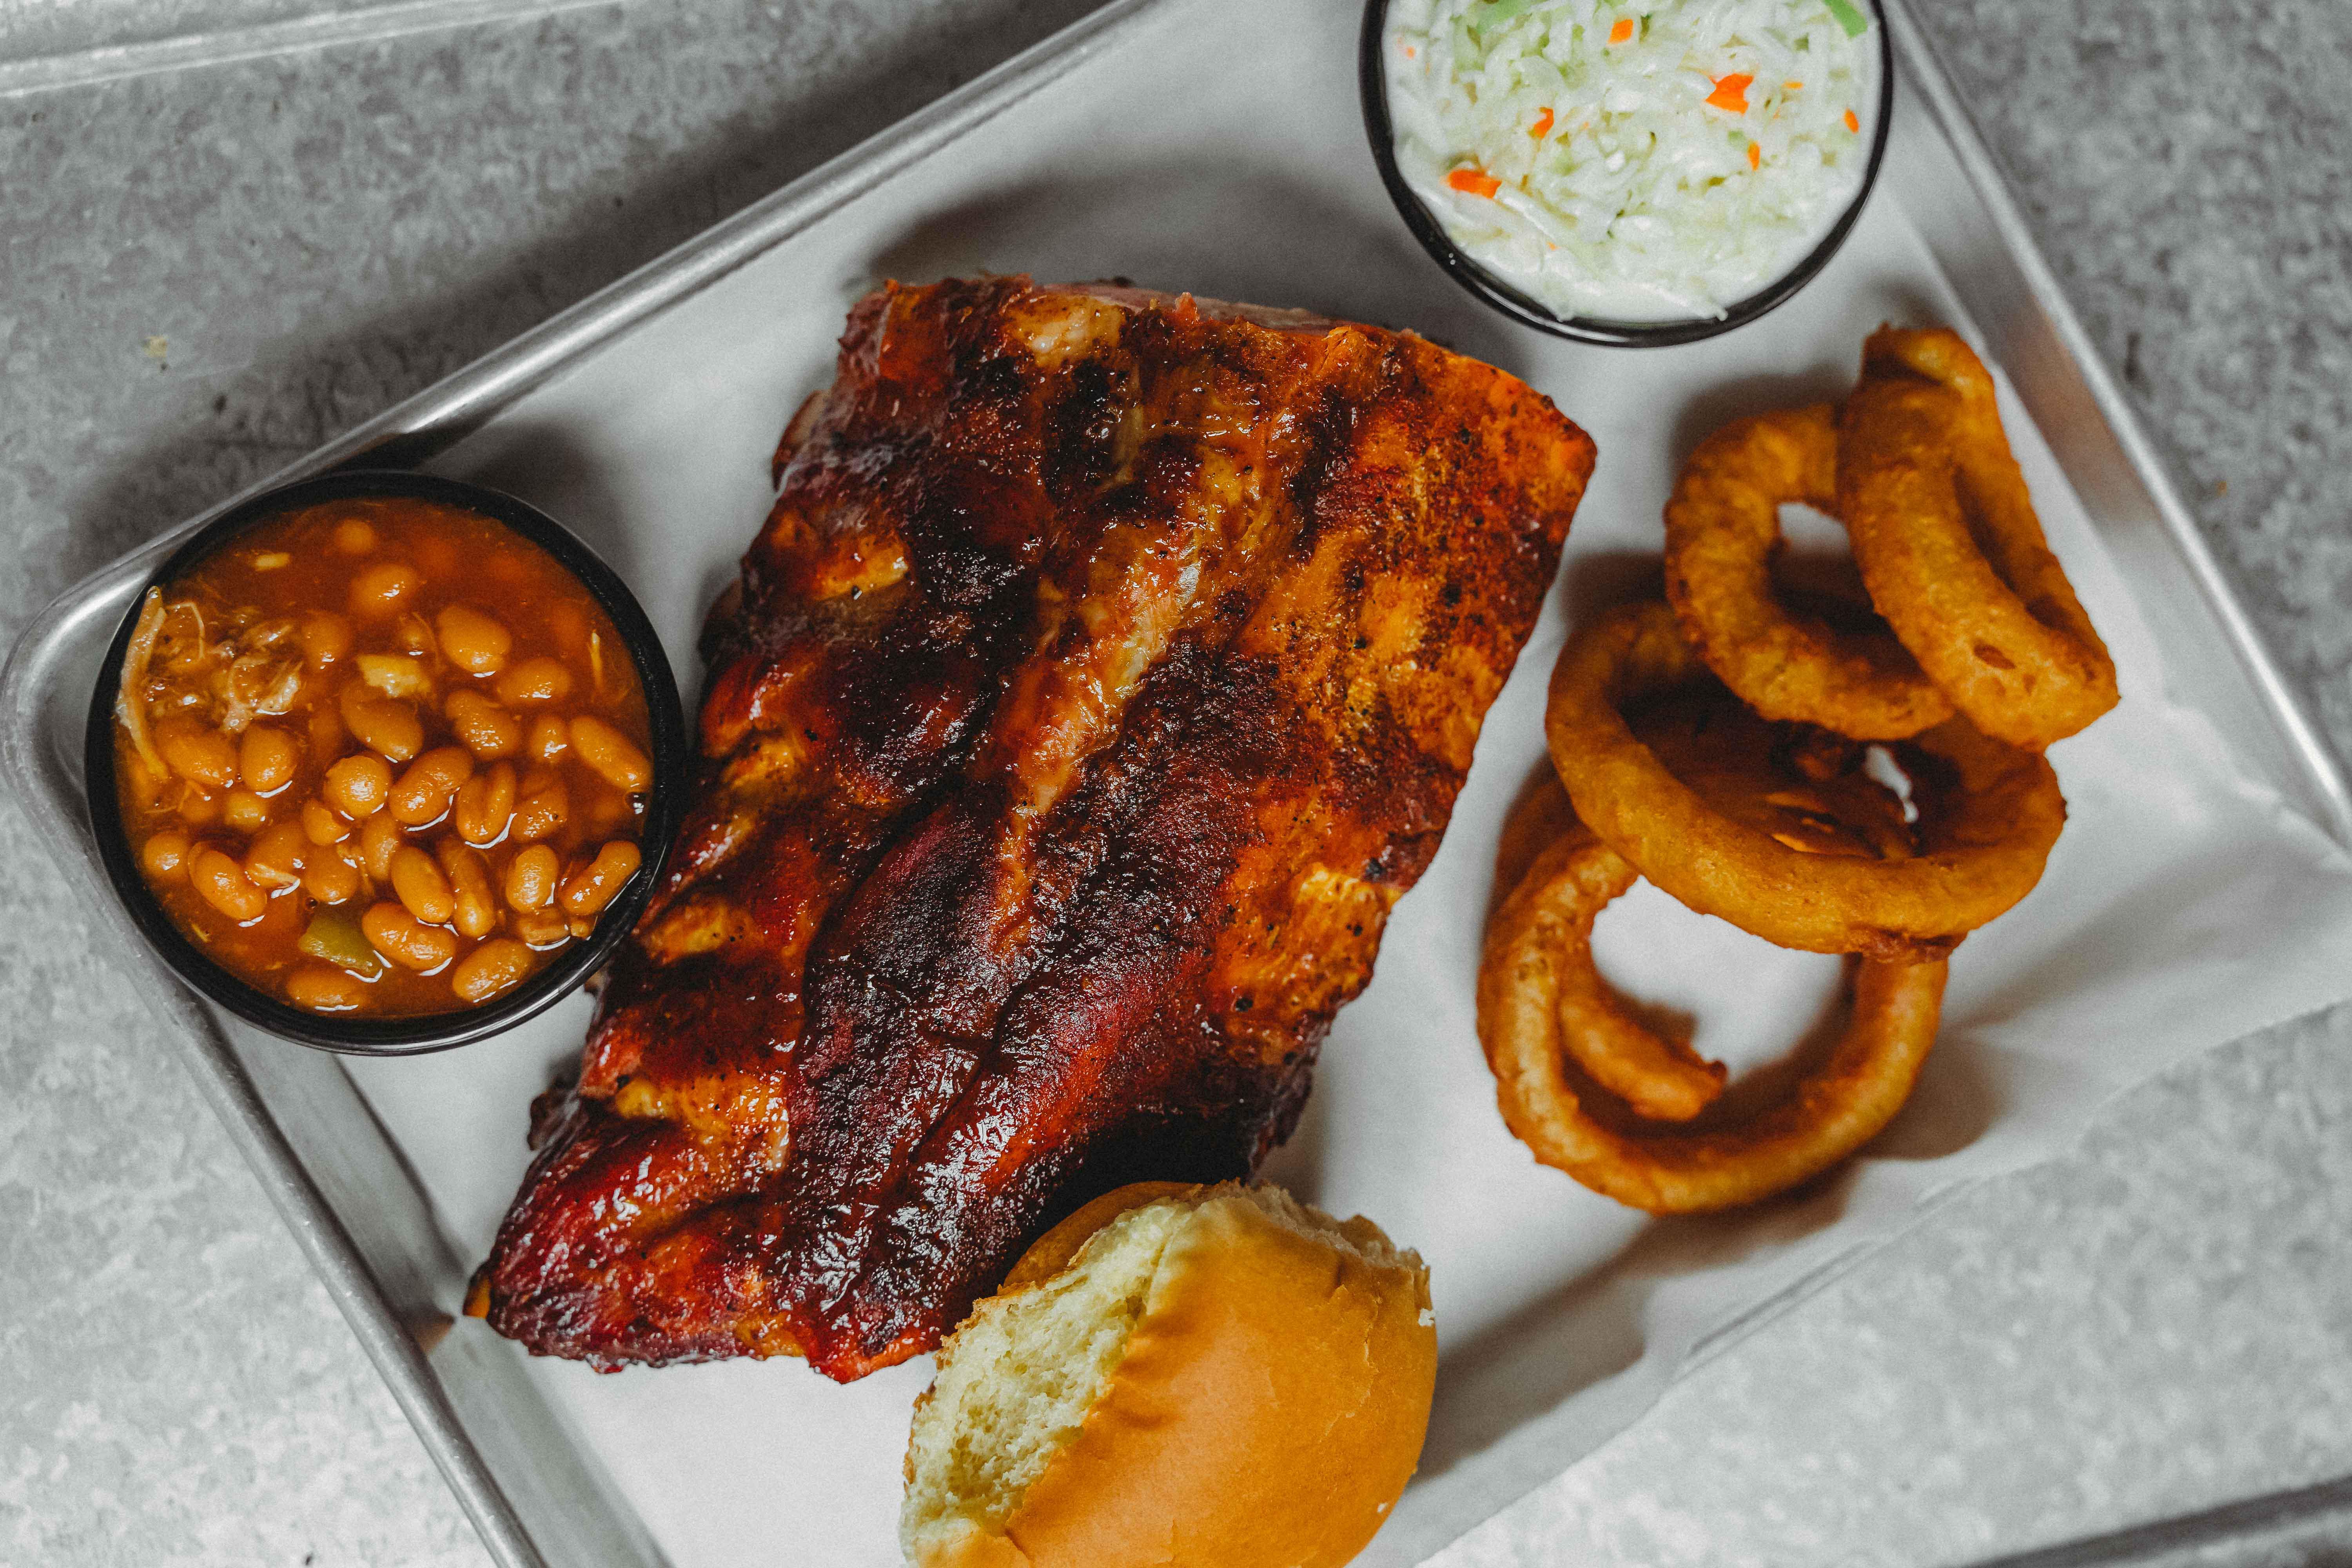 The Joint-BBQ, Wings & More